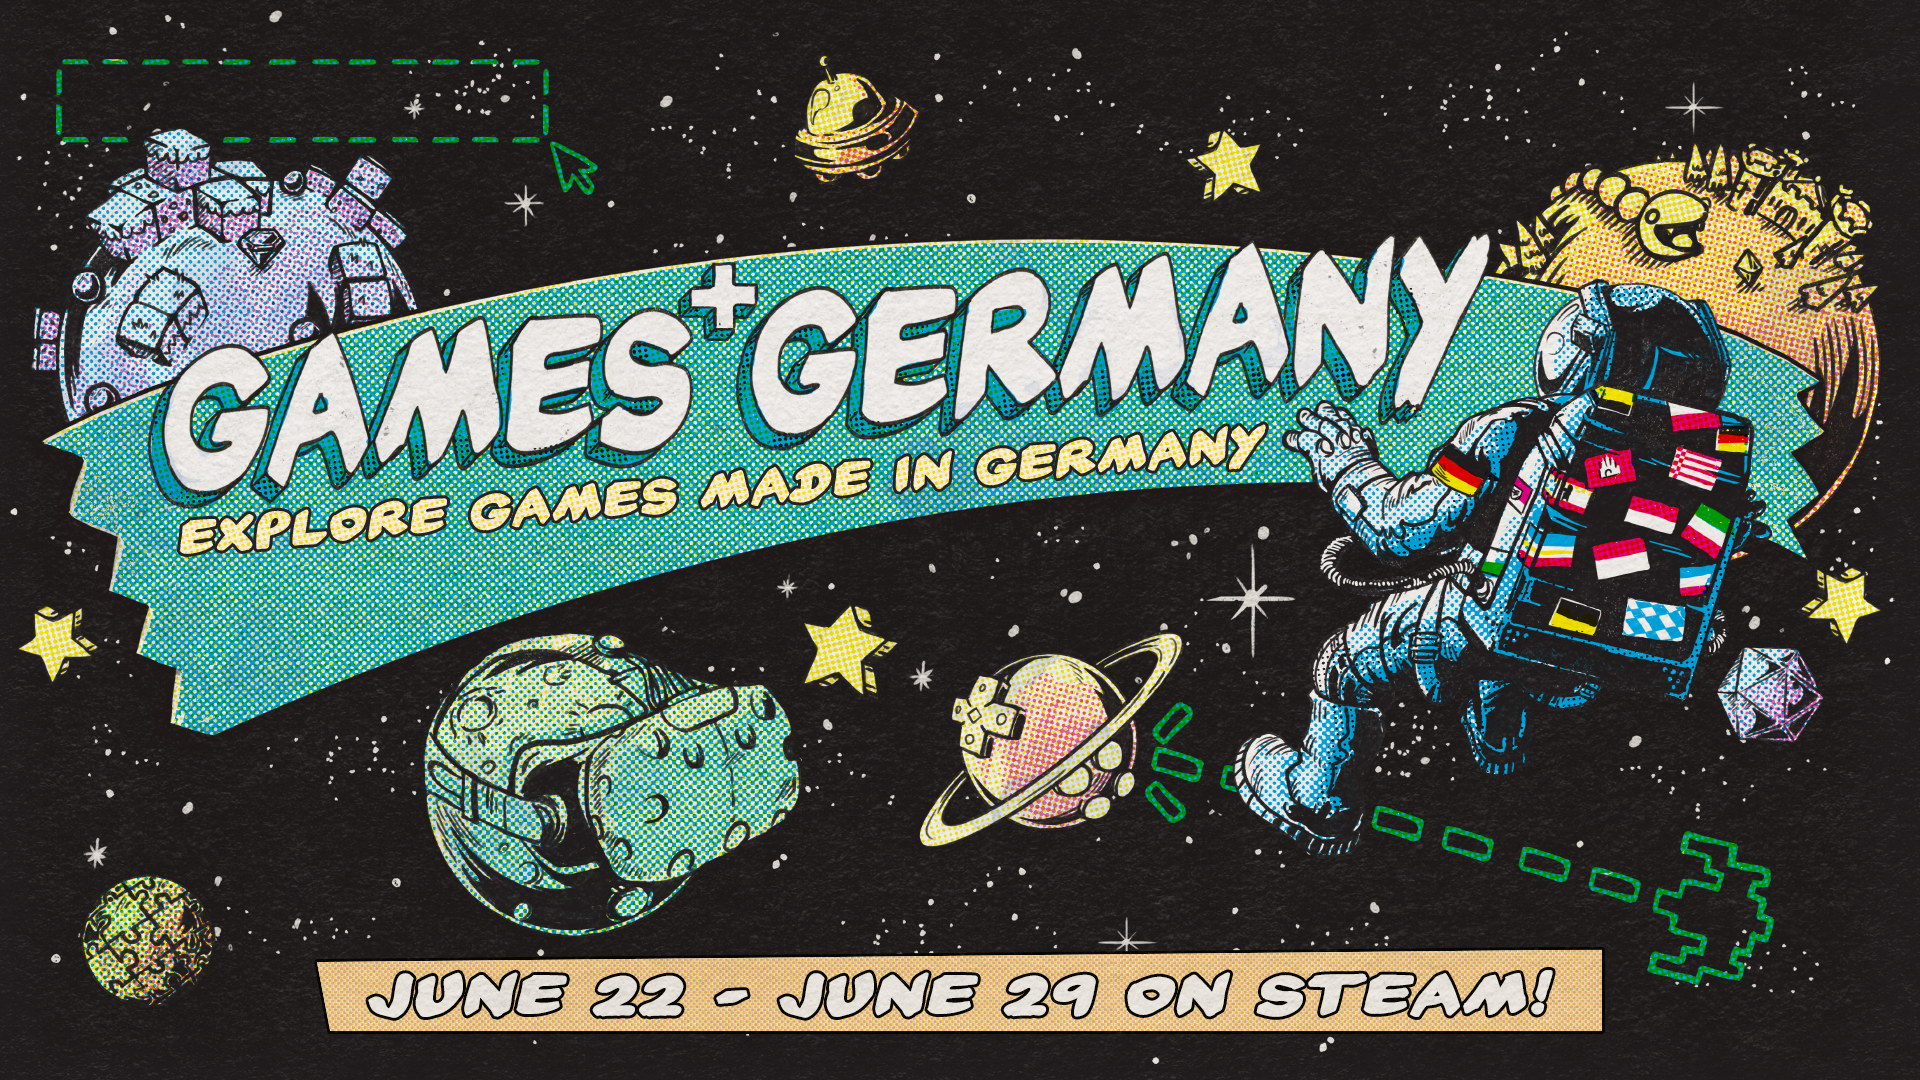 27 games get pulled from Steam in Germany, likely for being